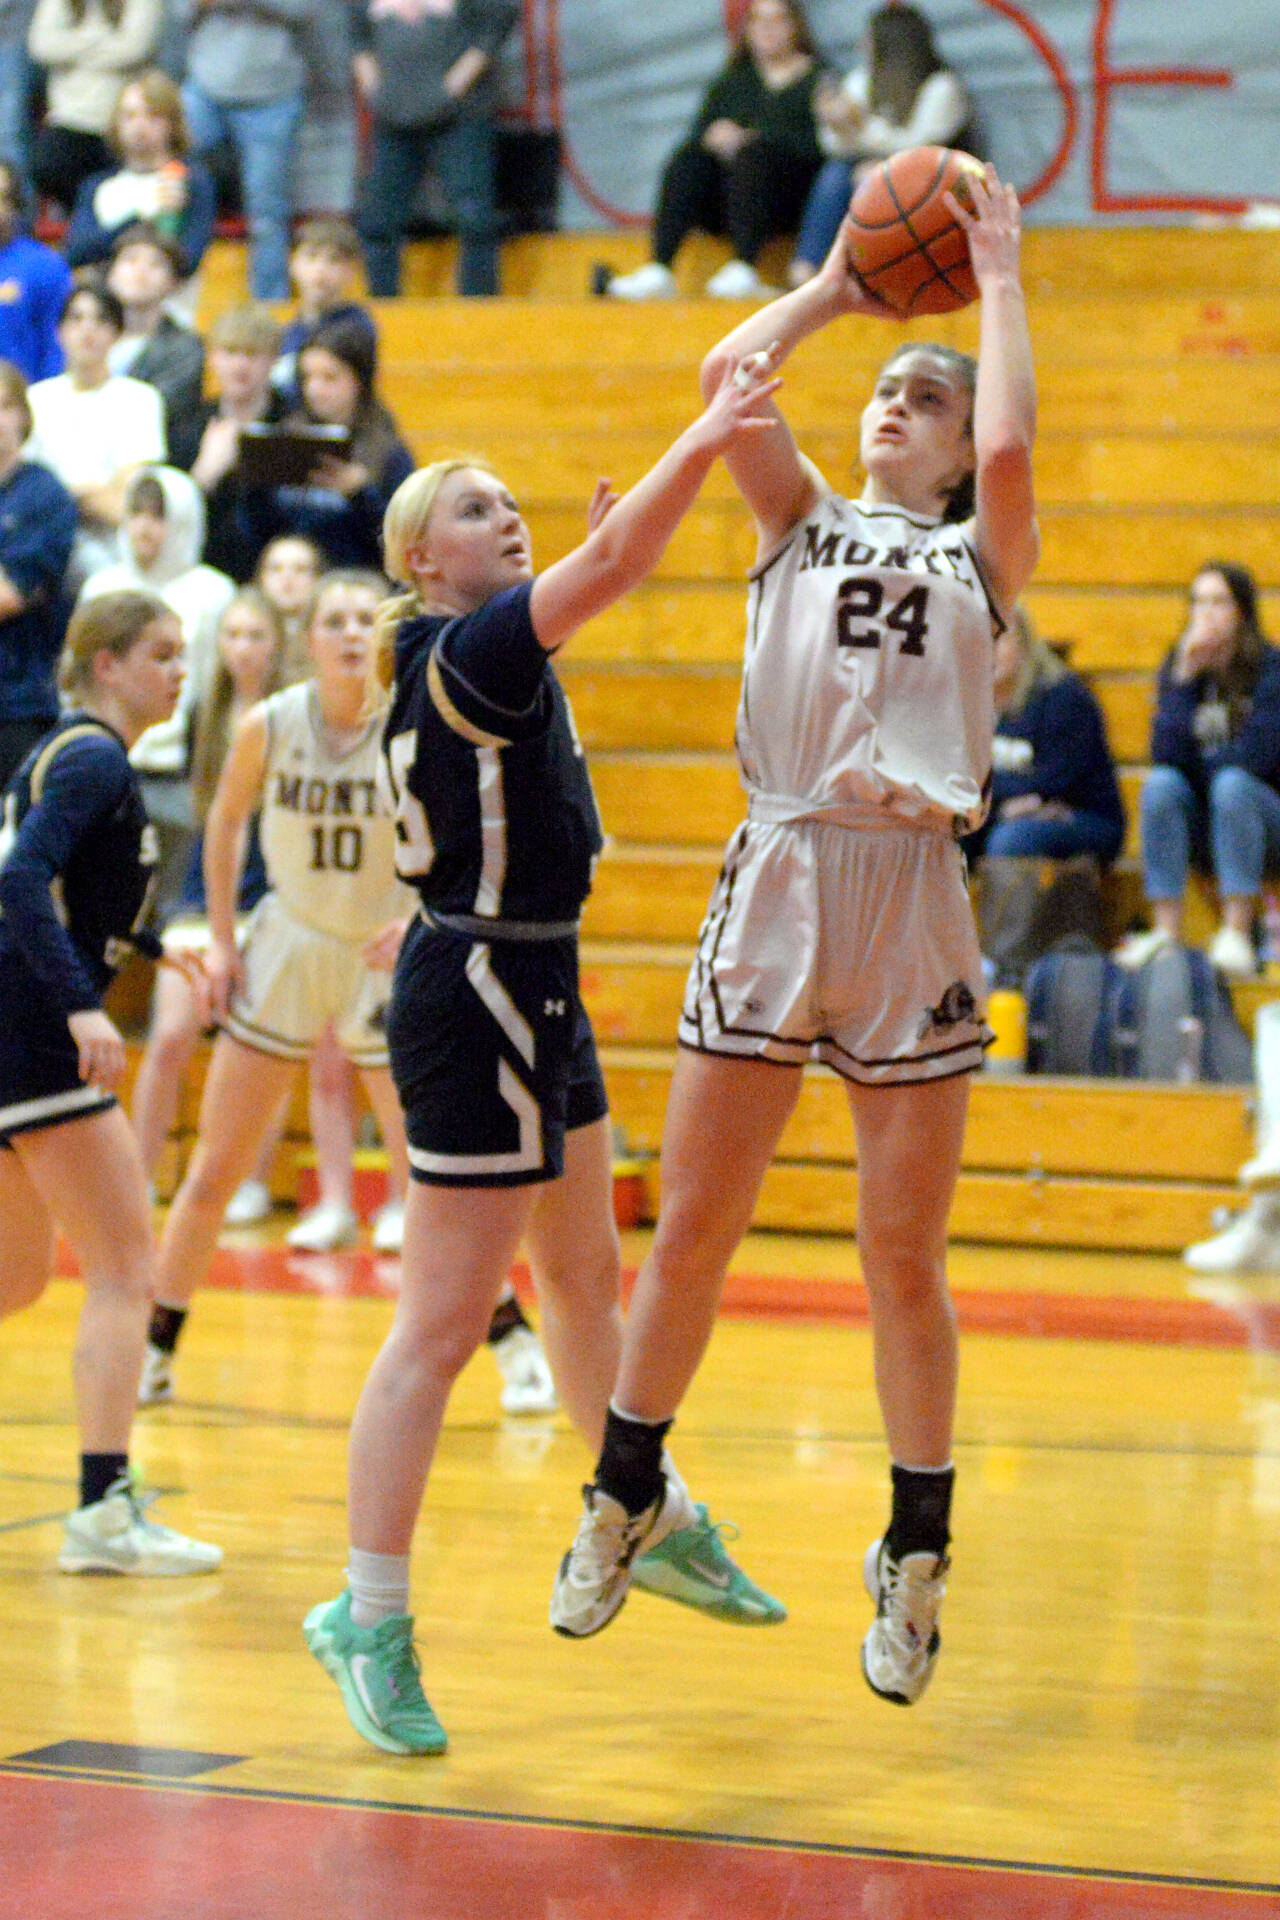 RYAN SPARKS | THE DAILY WORLD Montesano forward Jillie Dalan (24) puts up a shot against Seton Catholic’s Alyssa Mancuso during the Bulldogs’ 72-36 victory in the 1A District 4 Championship on Friday at Castle Rock High School.